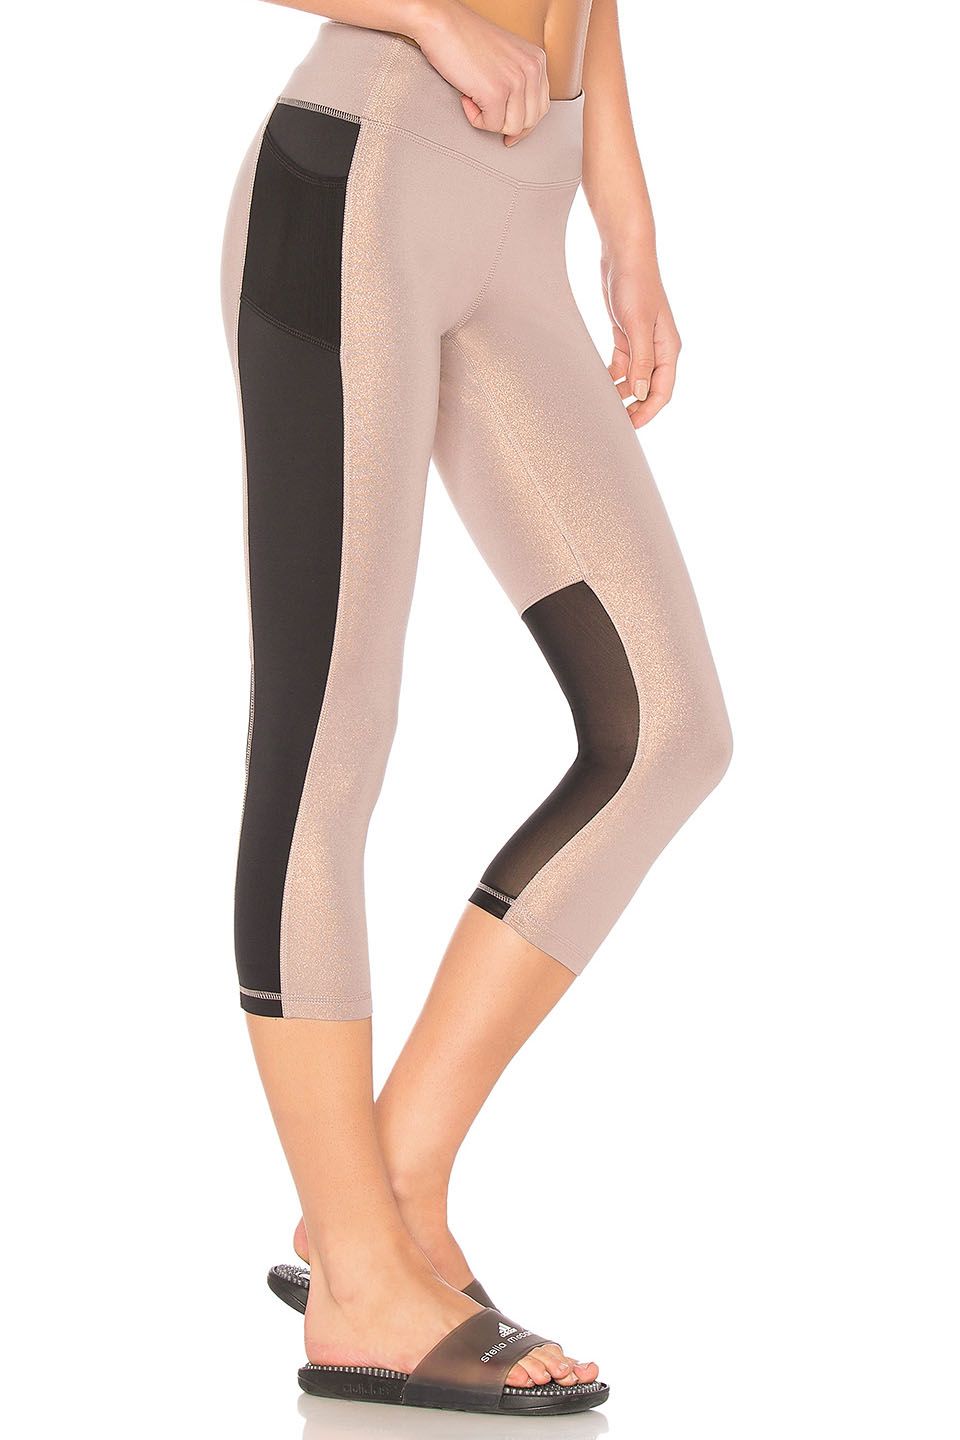 conquer fitness leggings sweden